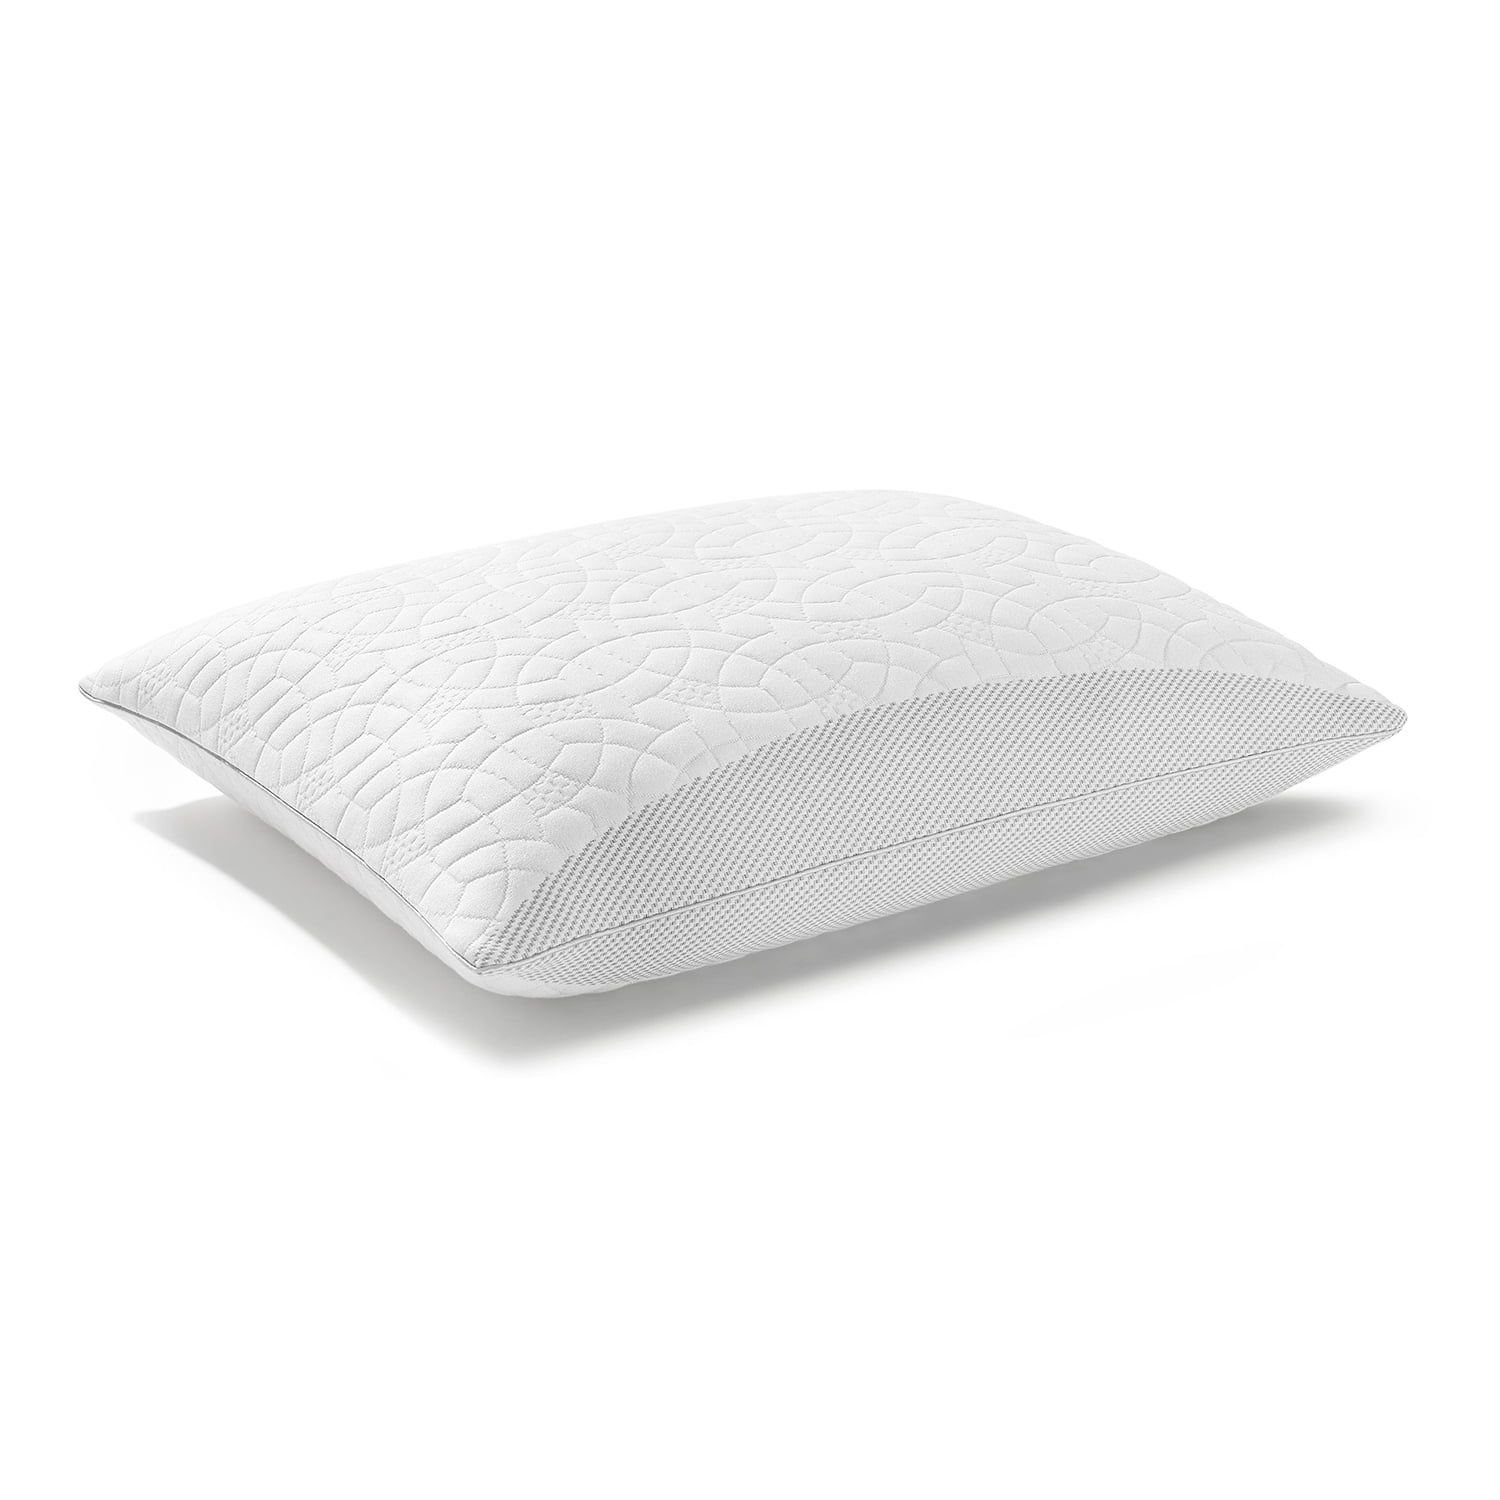 show original title Details about   Pillow Memory Foam Pillow Bow measures 72 x 42 x 13 Pillow Bed in memory 